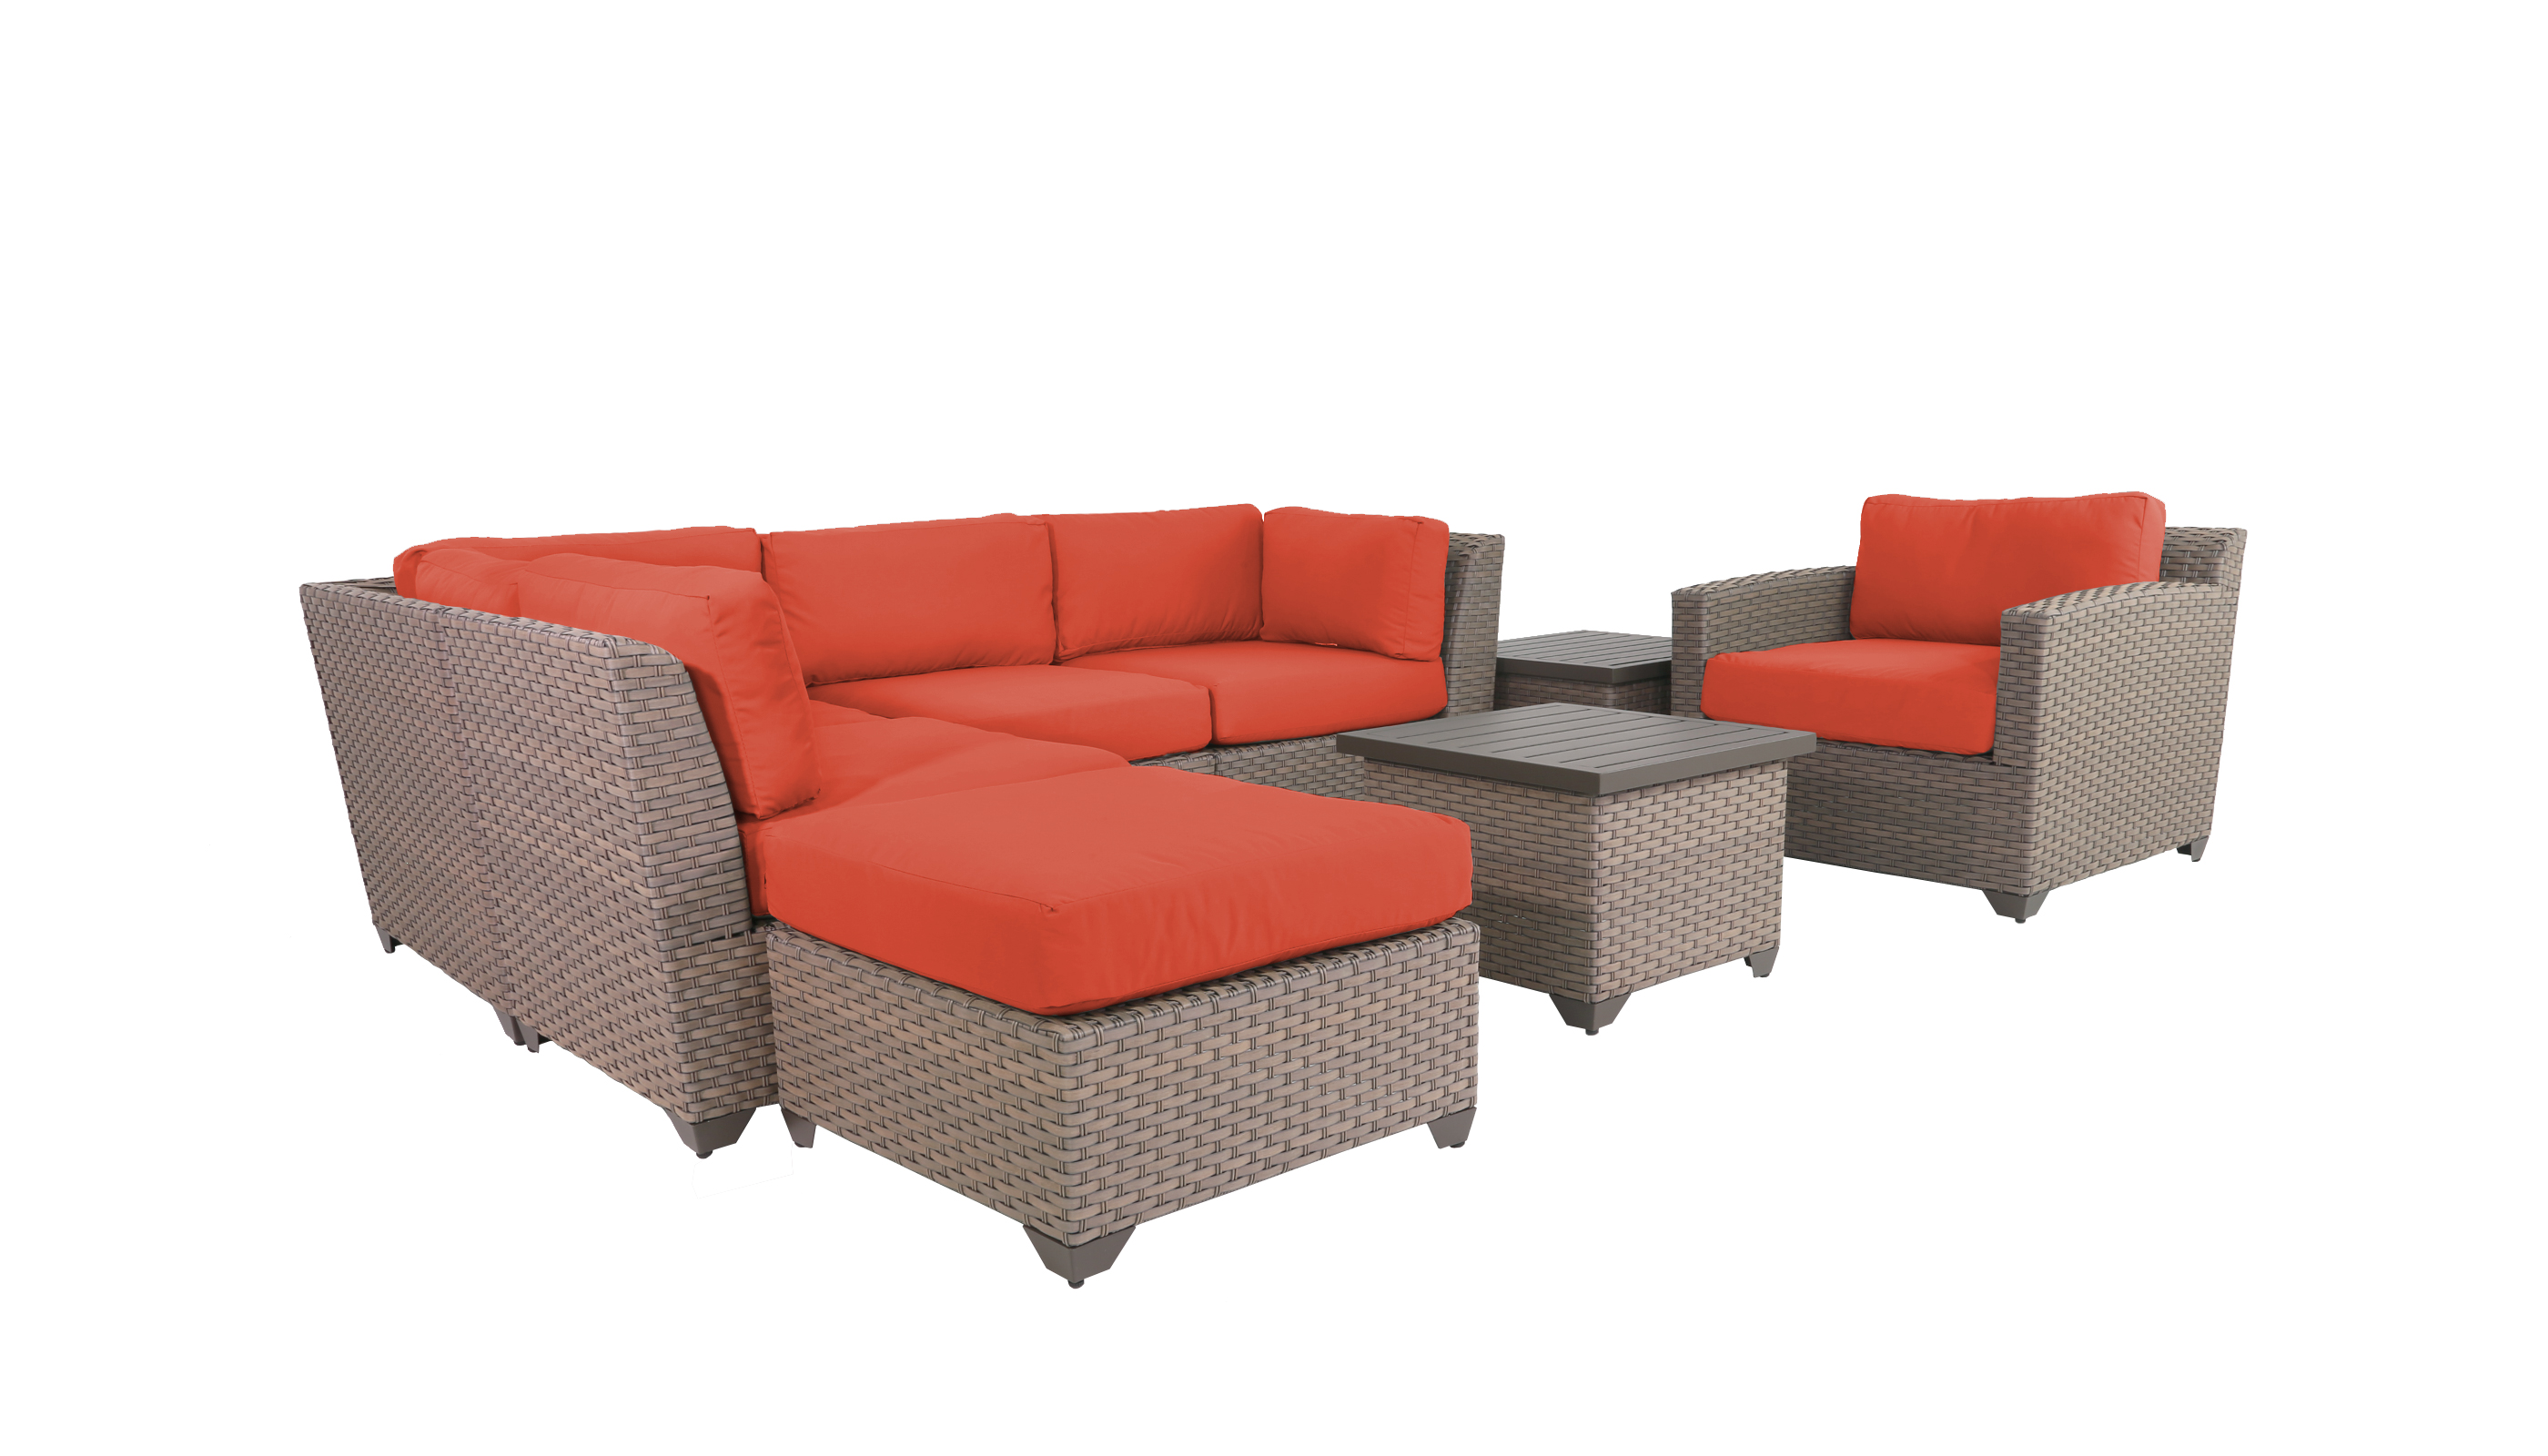 TK Classics Florence Wicker 8 Piece Patio Conversation Set with End Table and 2 Sets of Cushion Covers - image 3 of 12